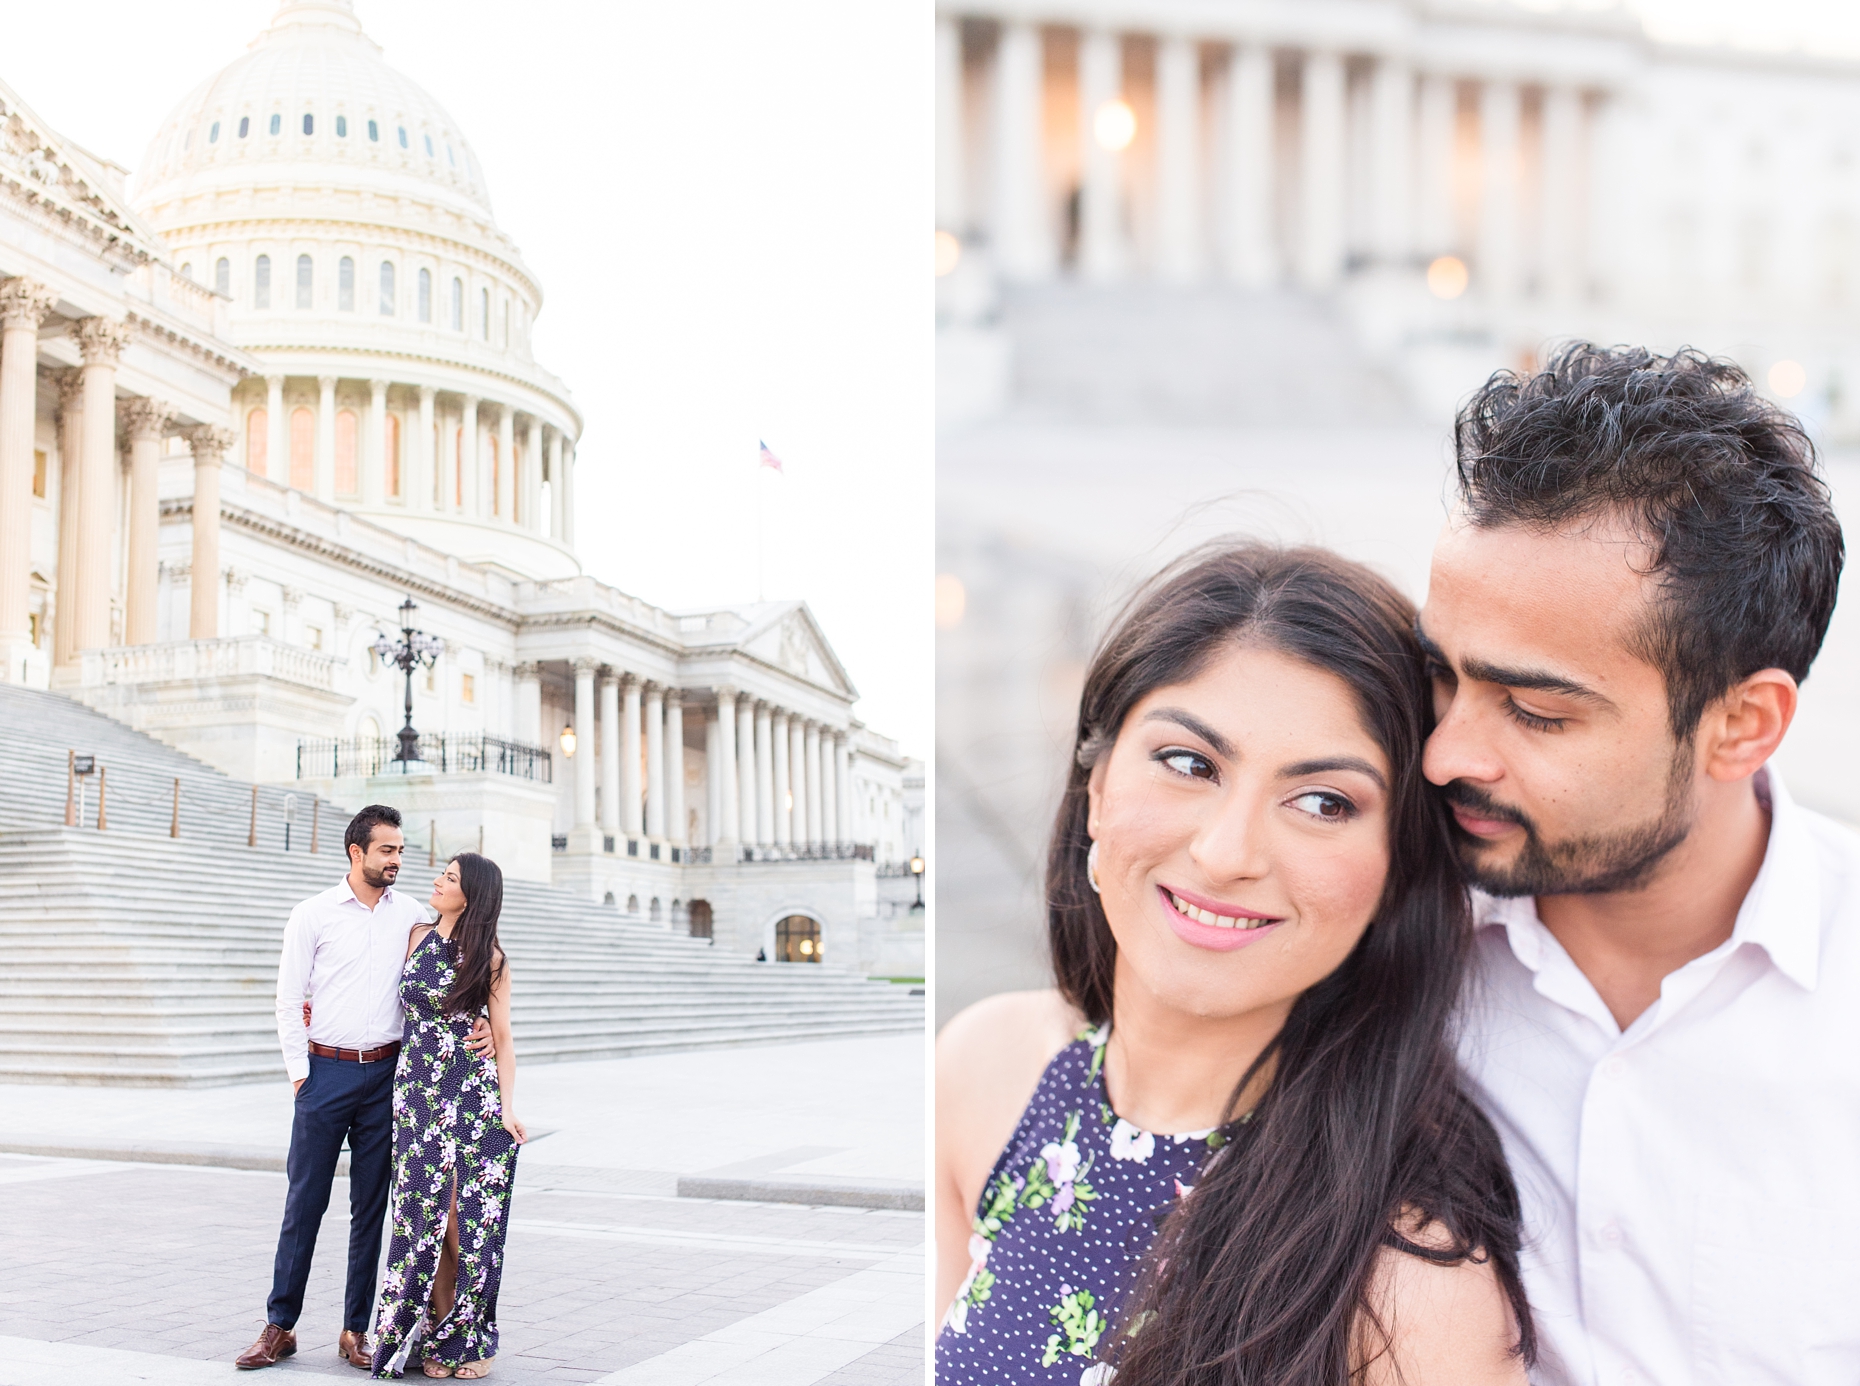 CapitolHillDCEngagementSessionPhotography-ManaliPhotography-020